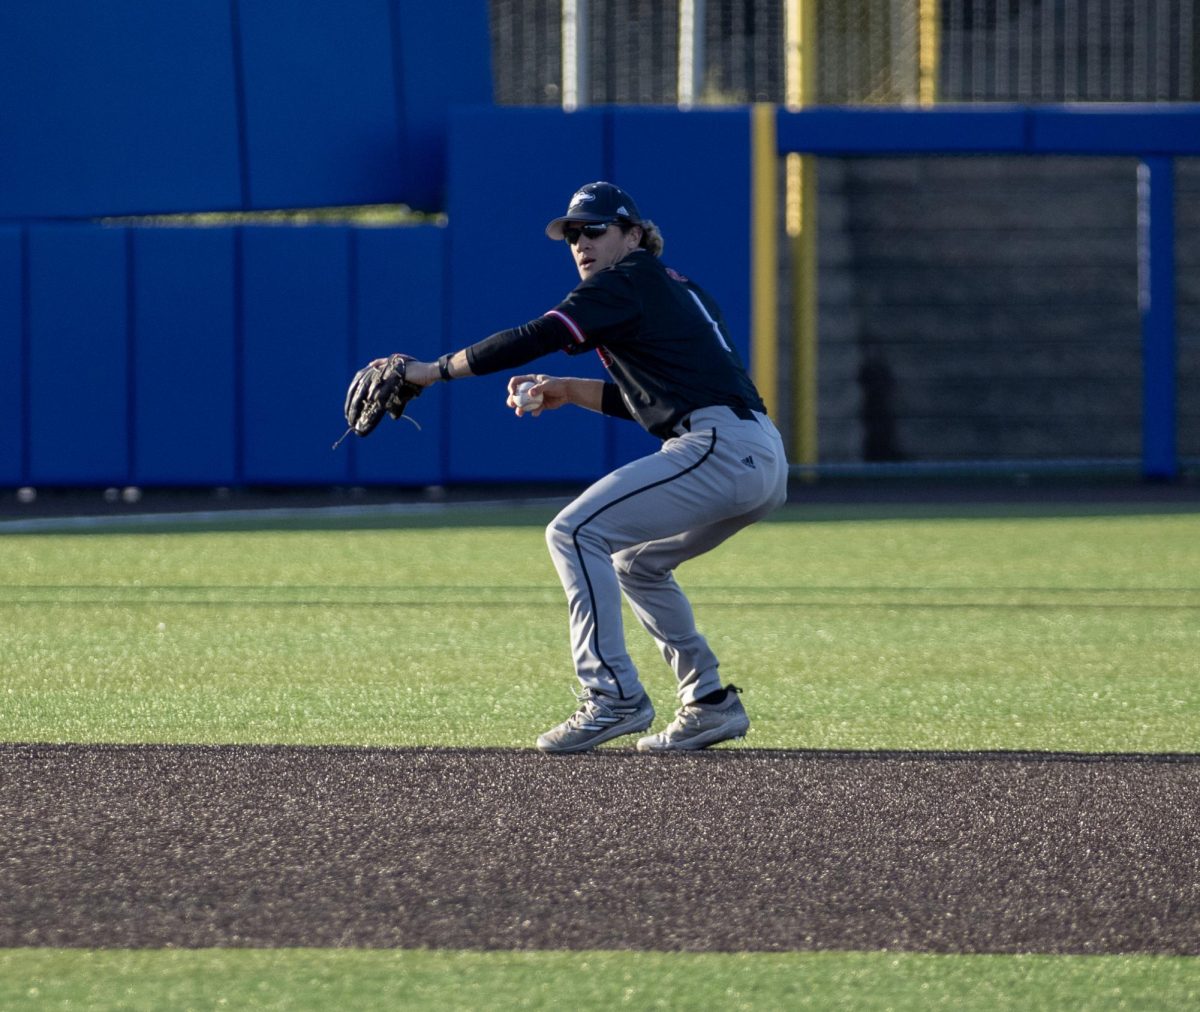 NIU senior infielder Andre Demetral gets set to throw the ball to first base on April 24 at Curtis Granderson Stadium. Demetral scored two runs as NIU baseball fell 6-5 to the University of Wisconsin-Milwaukee Panthers on Wednesday. (Northern Star File Photo)